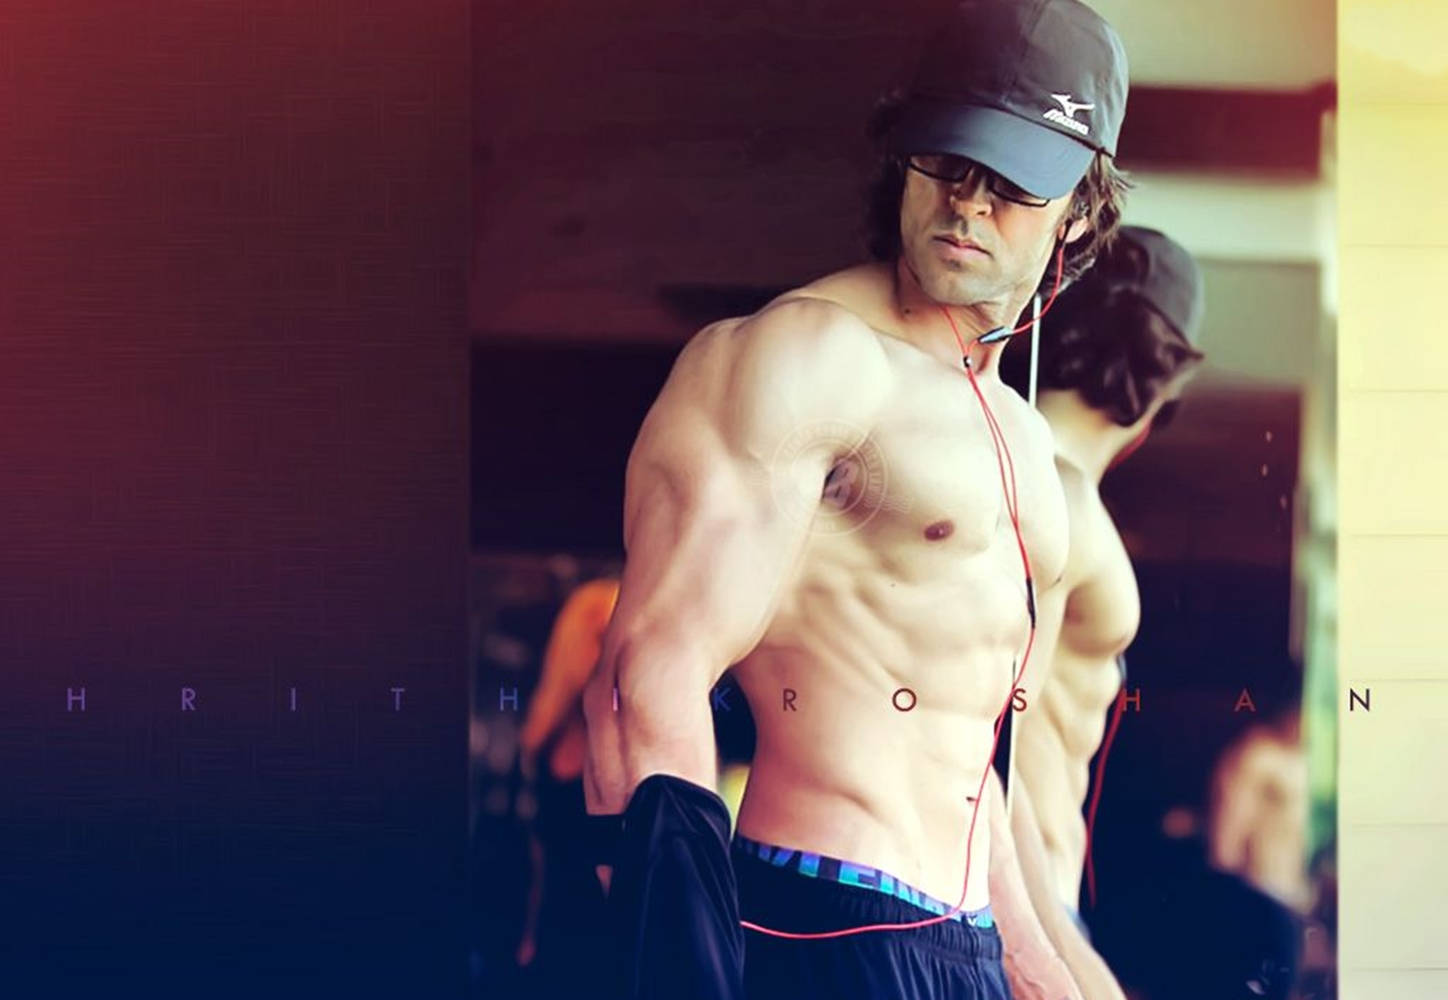 Hrithik Roshan Body Working Out At Gym